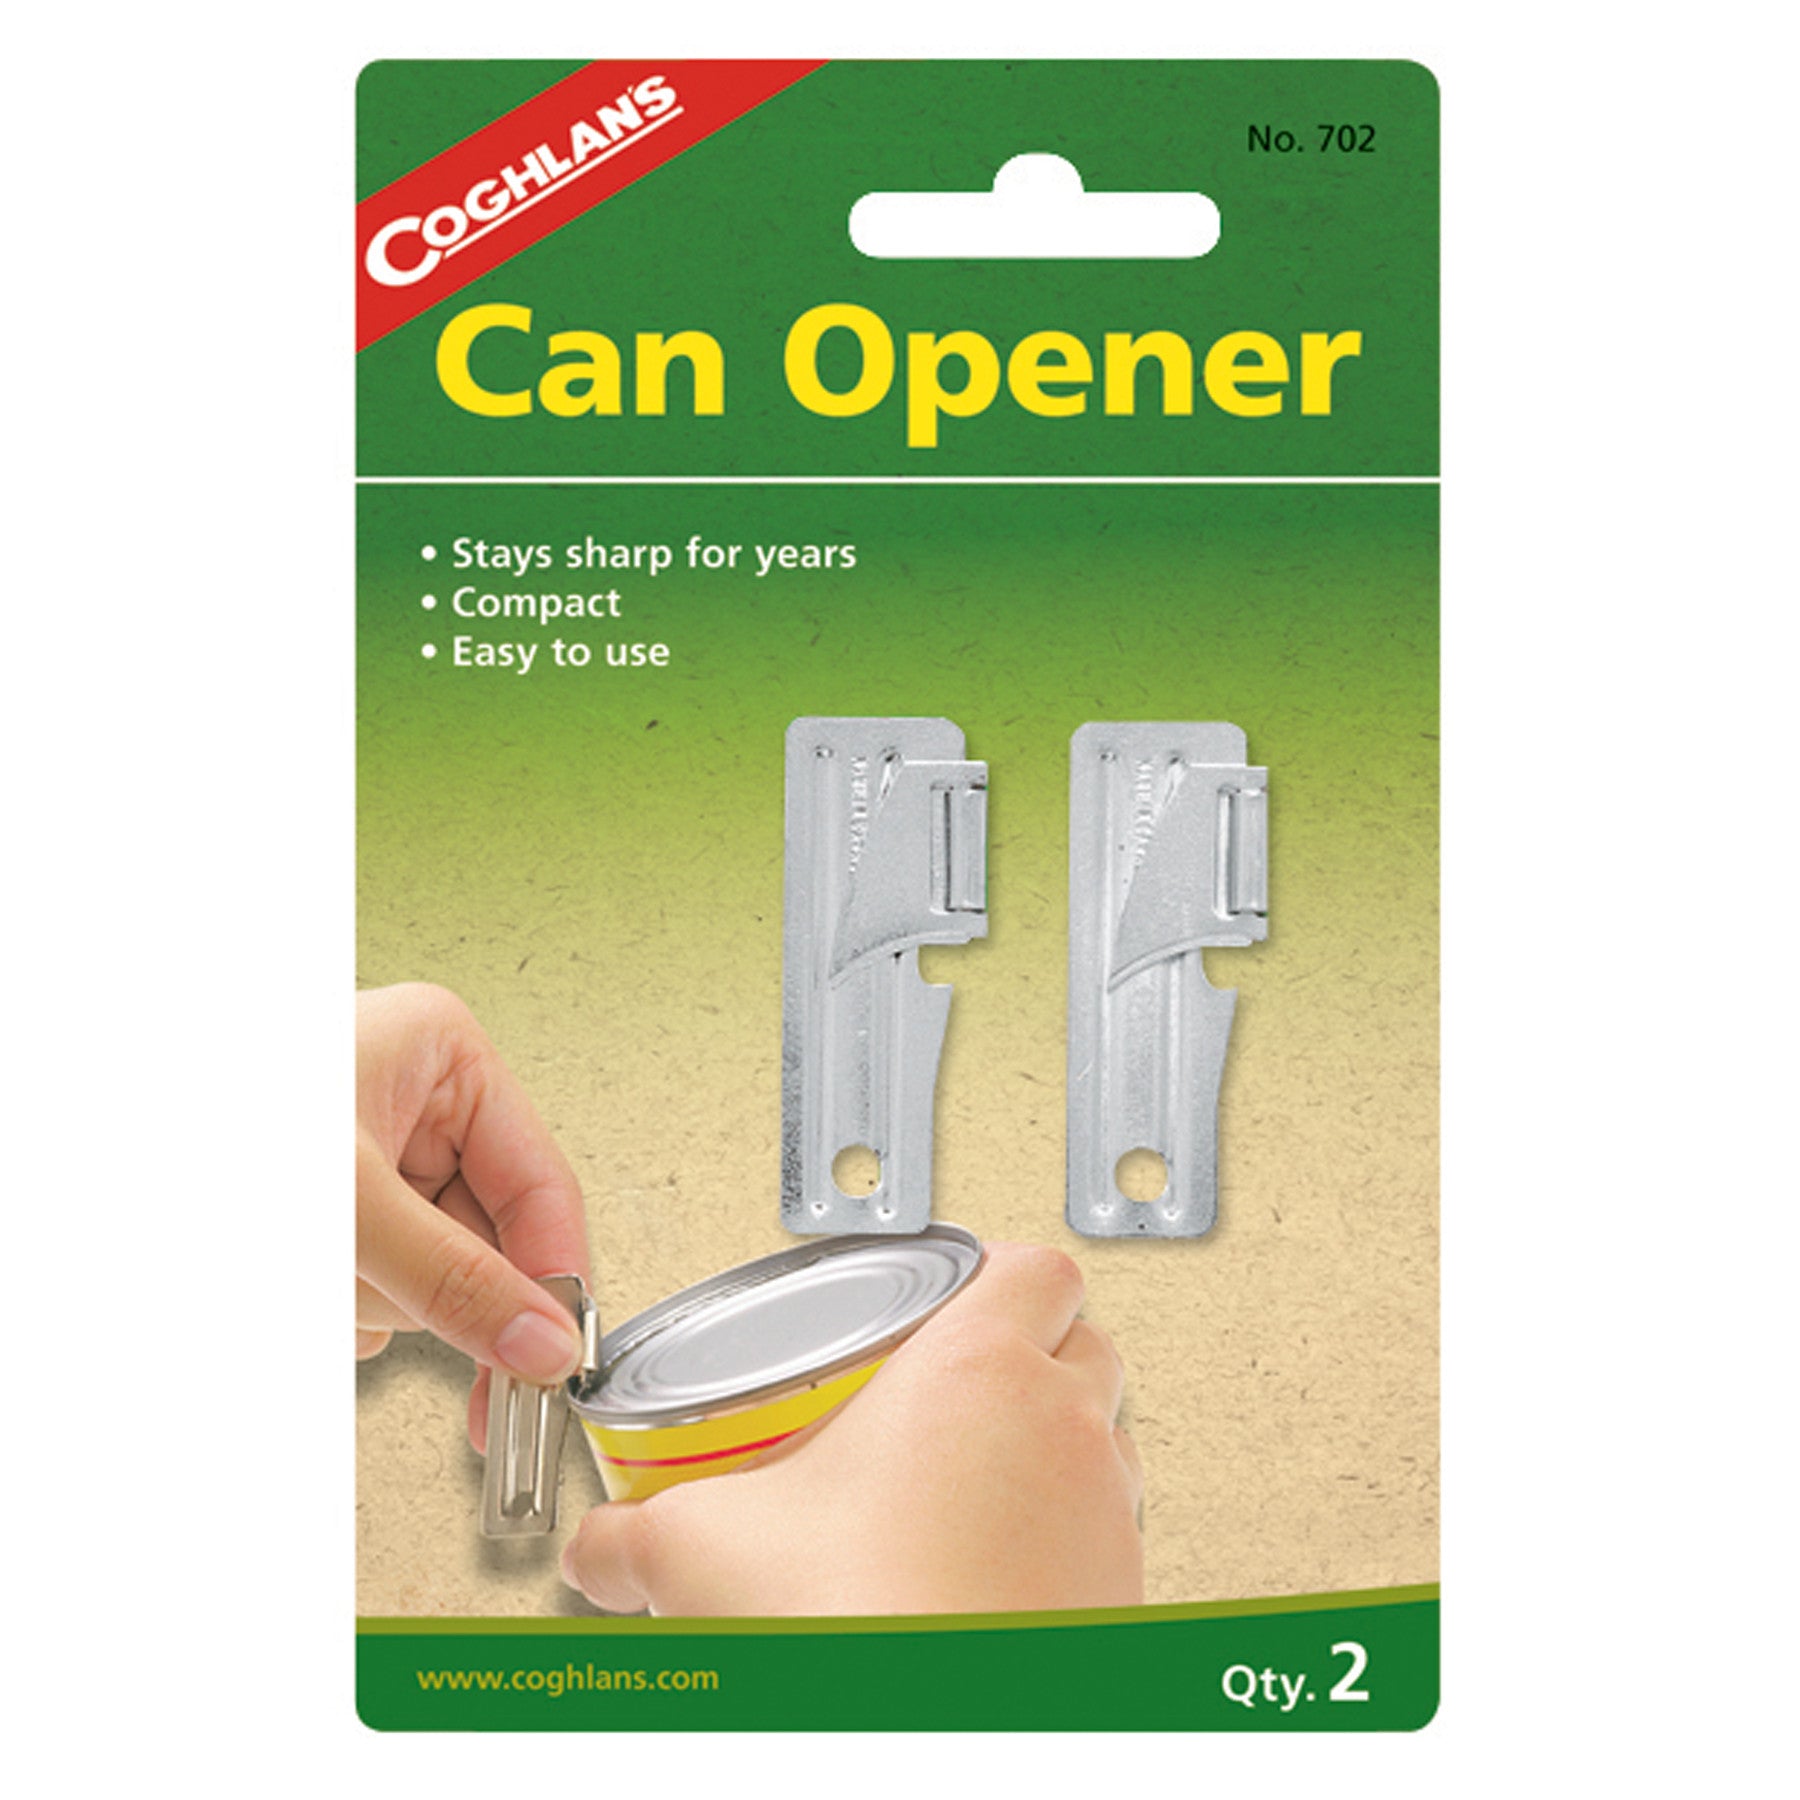 Can Opener (2 Pack) alternate view